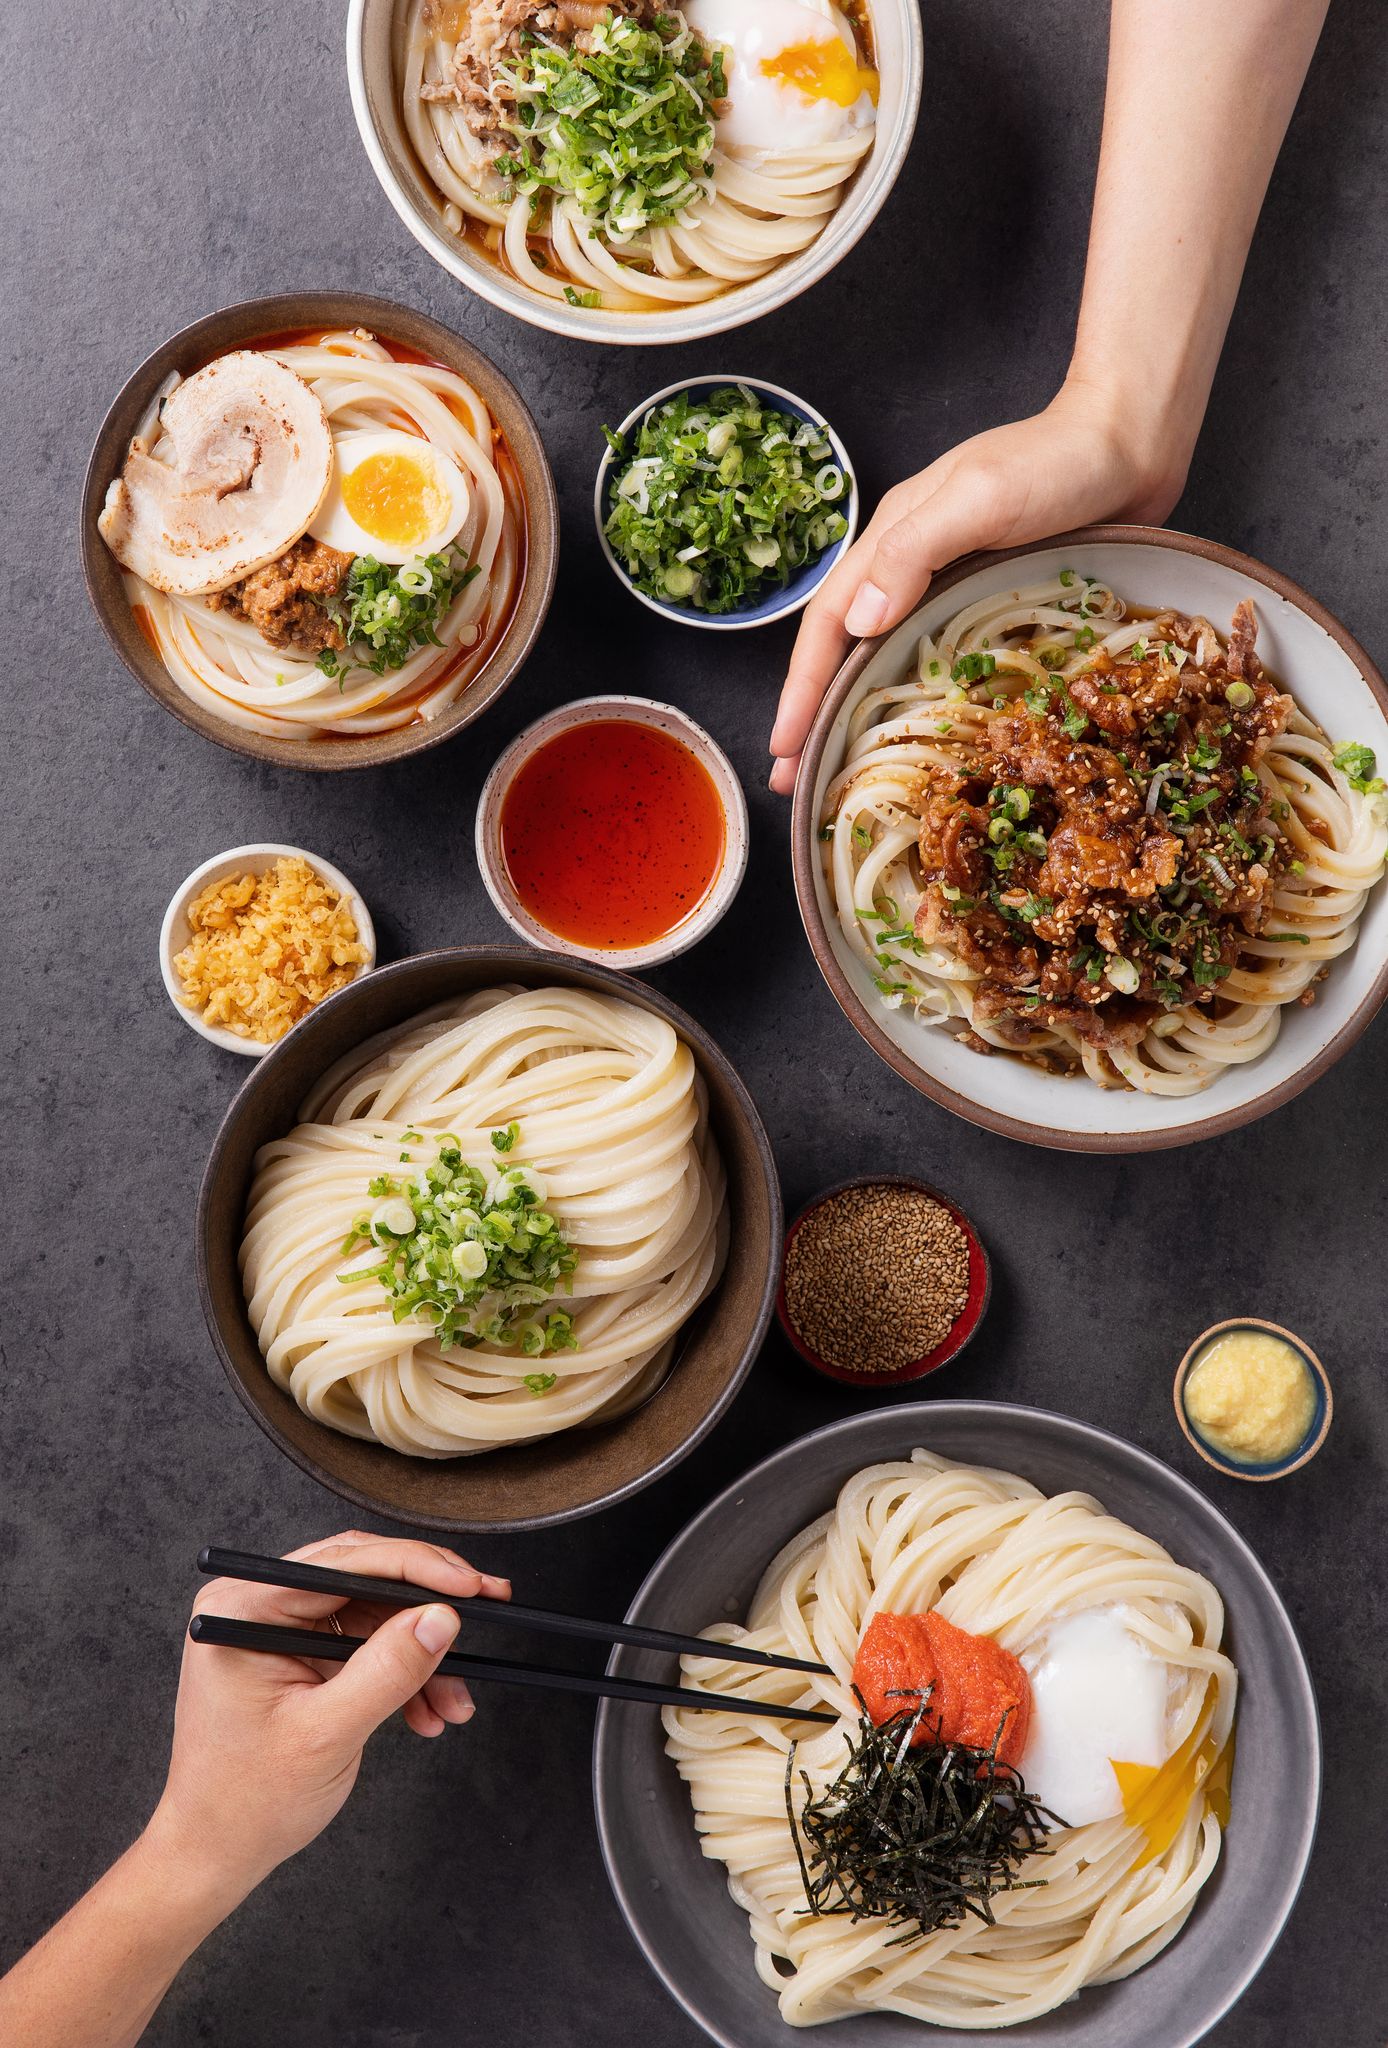 Bowls of udon noodles, soup, and sides.